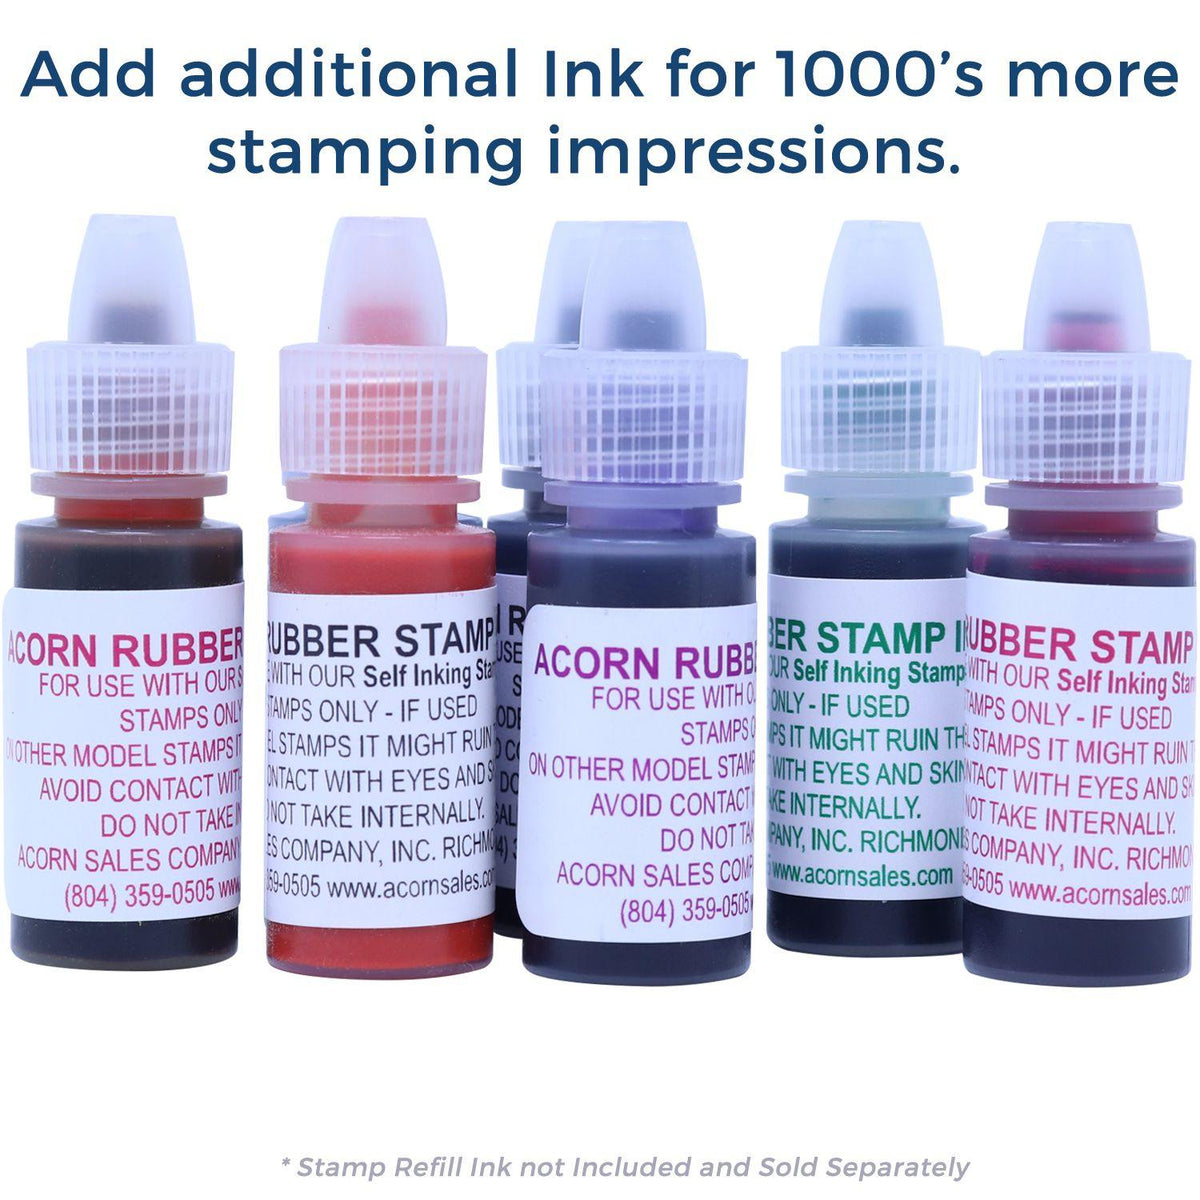 Refill Inks for Large Pre-Inked Posted with Date Box Stamp Available